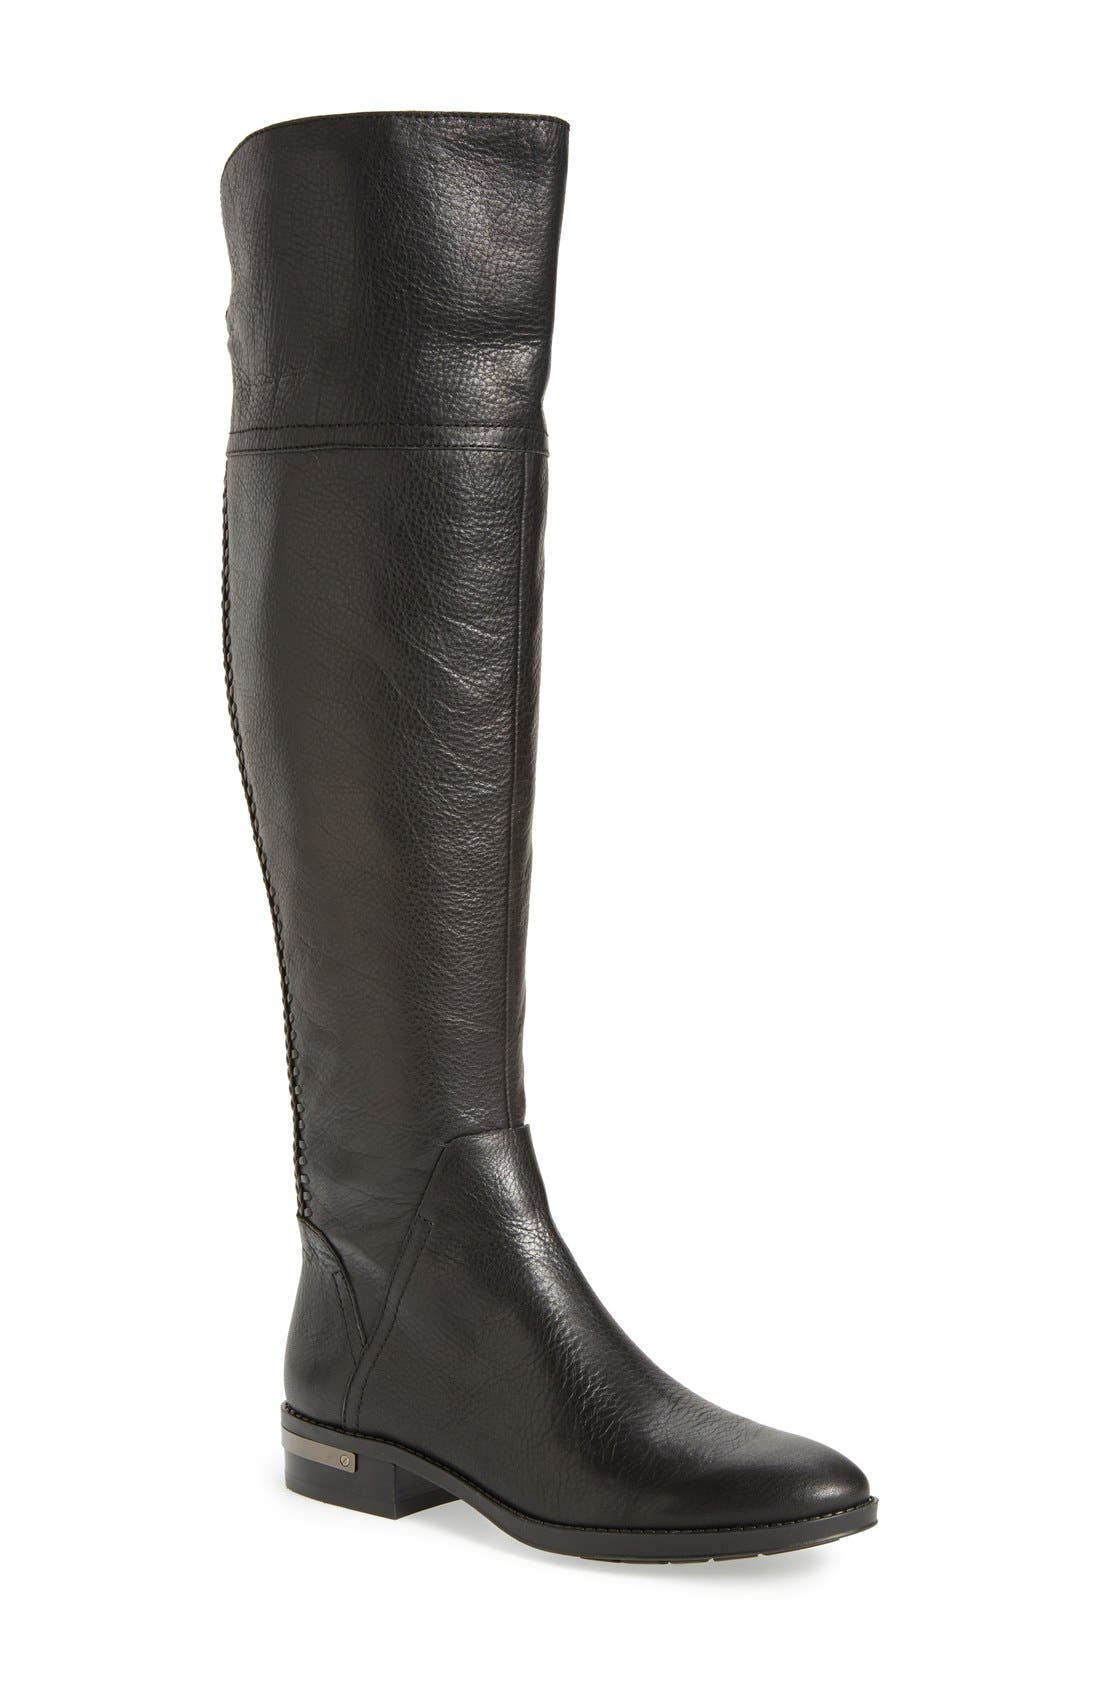 Vince Camuto | Pedra Over the Knee Boot 